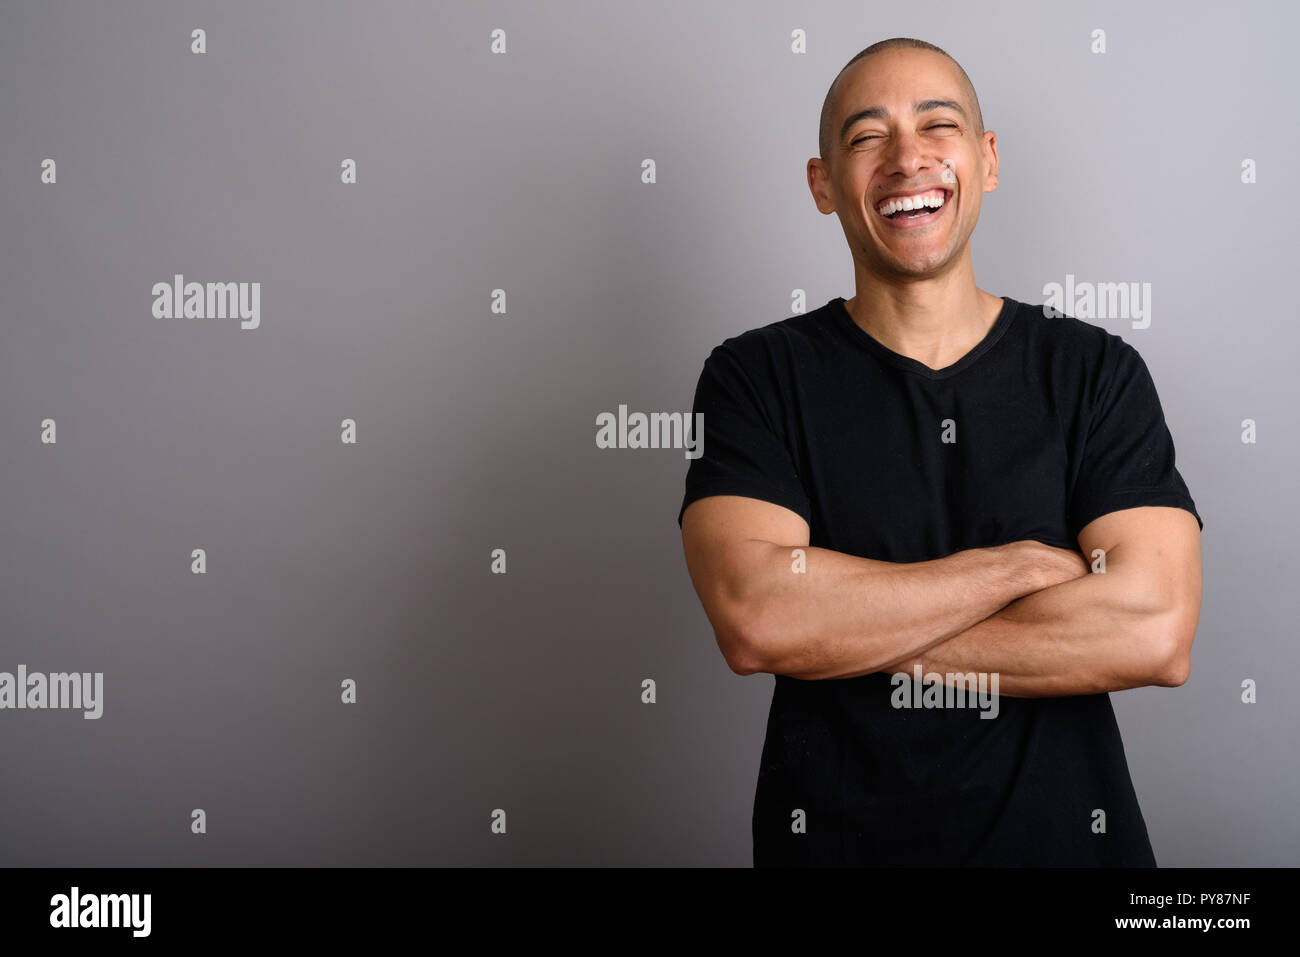 Happy bald man smiling and laughing with arms crossed Stock Photo